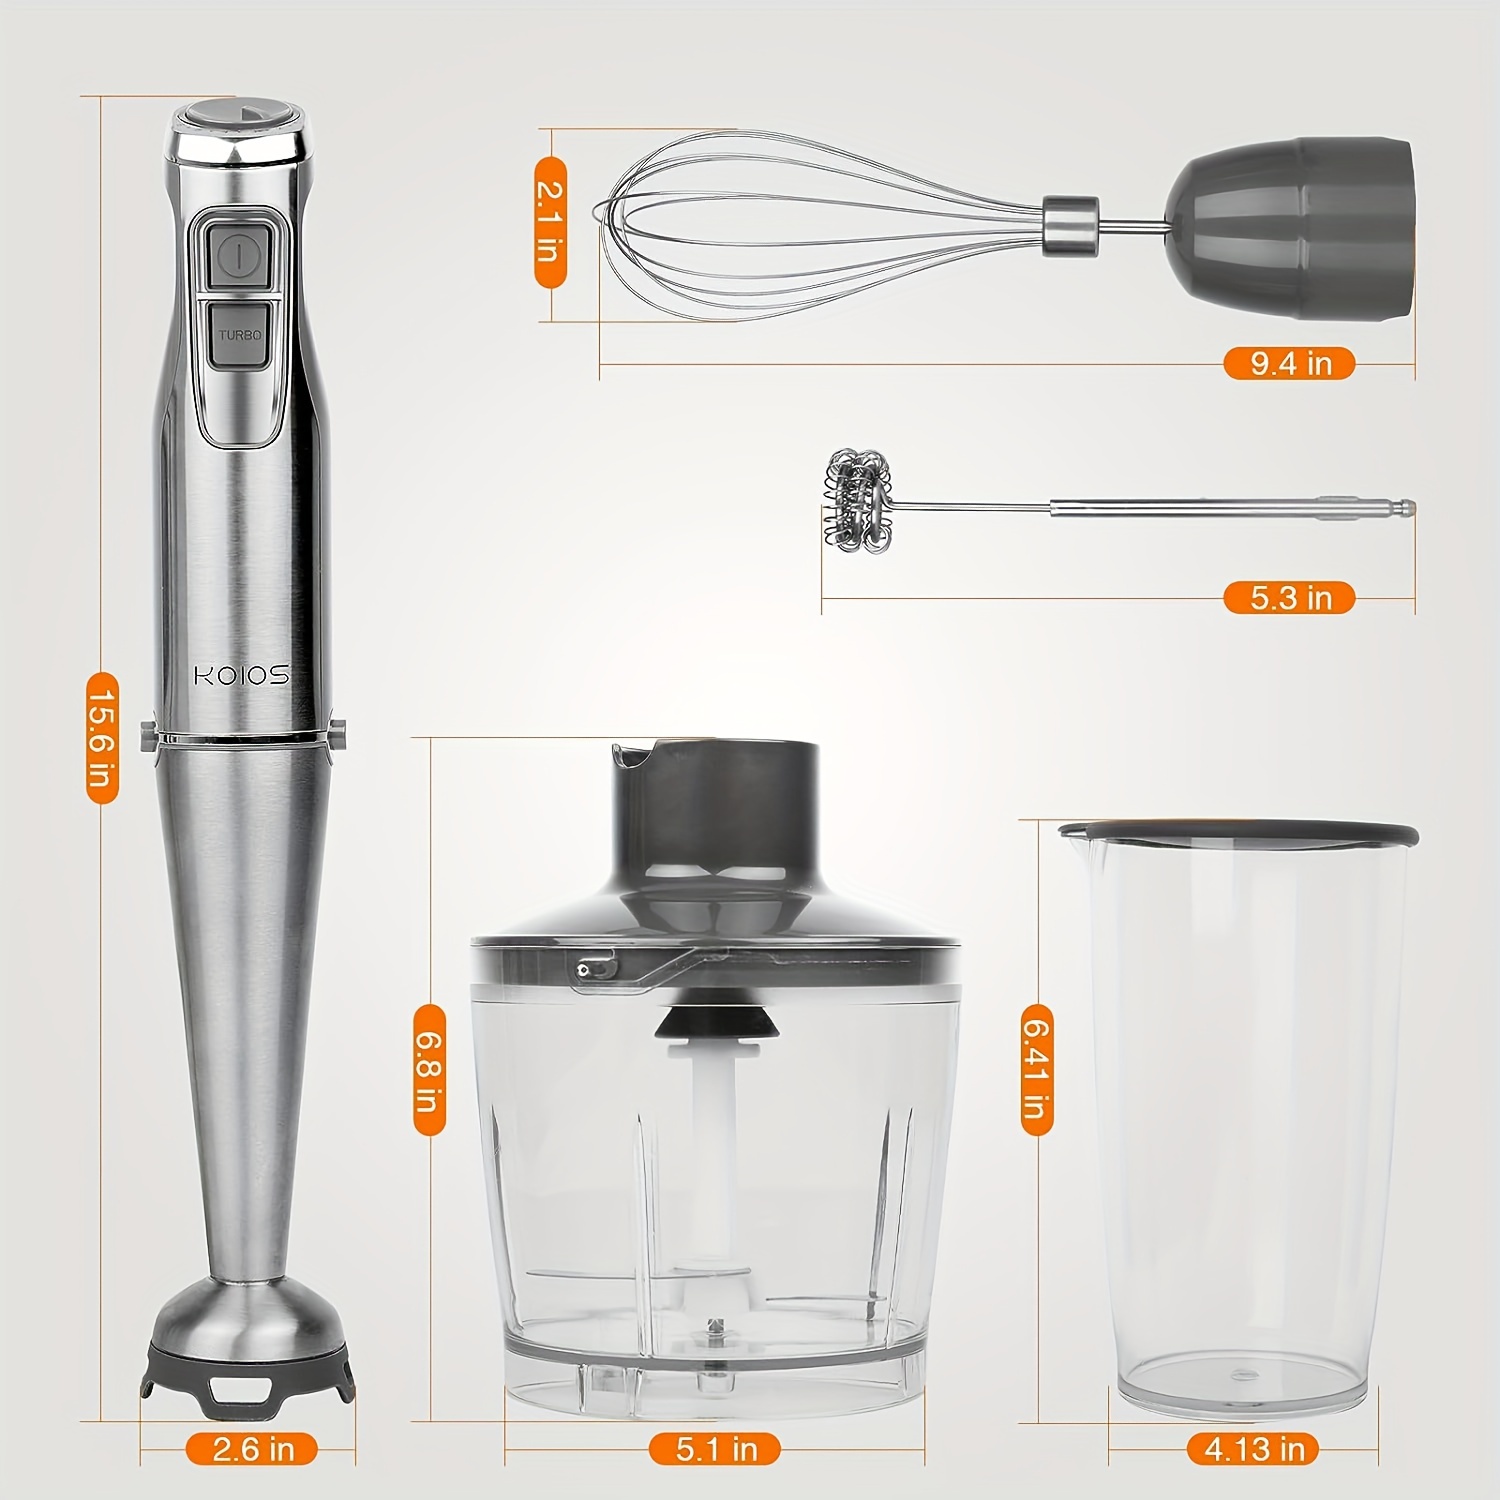 KOIOS 1100W Immersion Hand Blender, Stainless Steel Stick Blender with  12-Speed & Turbo Mode, 5-in-1 Handheld Blender with 600ml Mixing Beaker  with Lid, 500ml Chopper, Whisk, Milk Frother, BPA-Free 